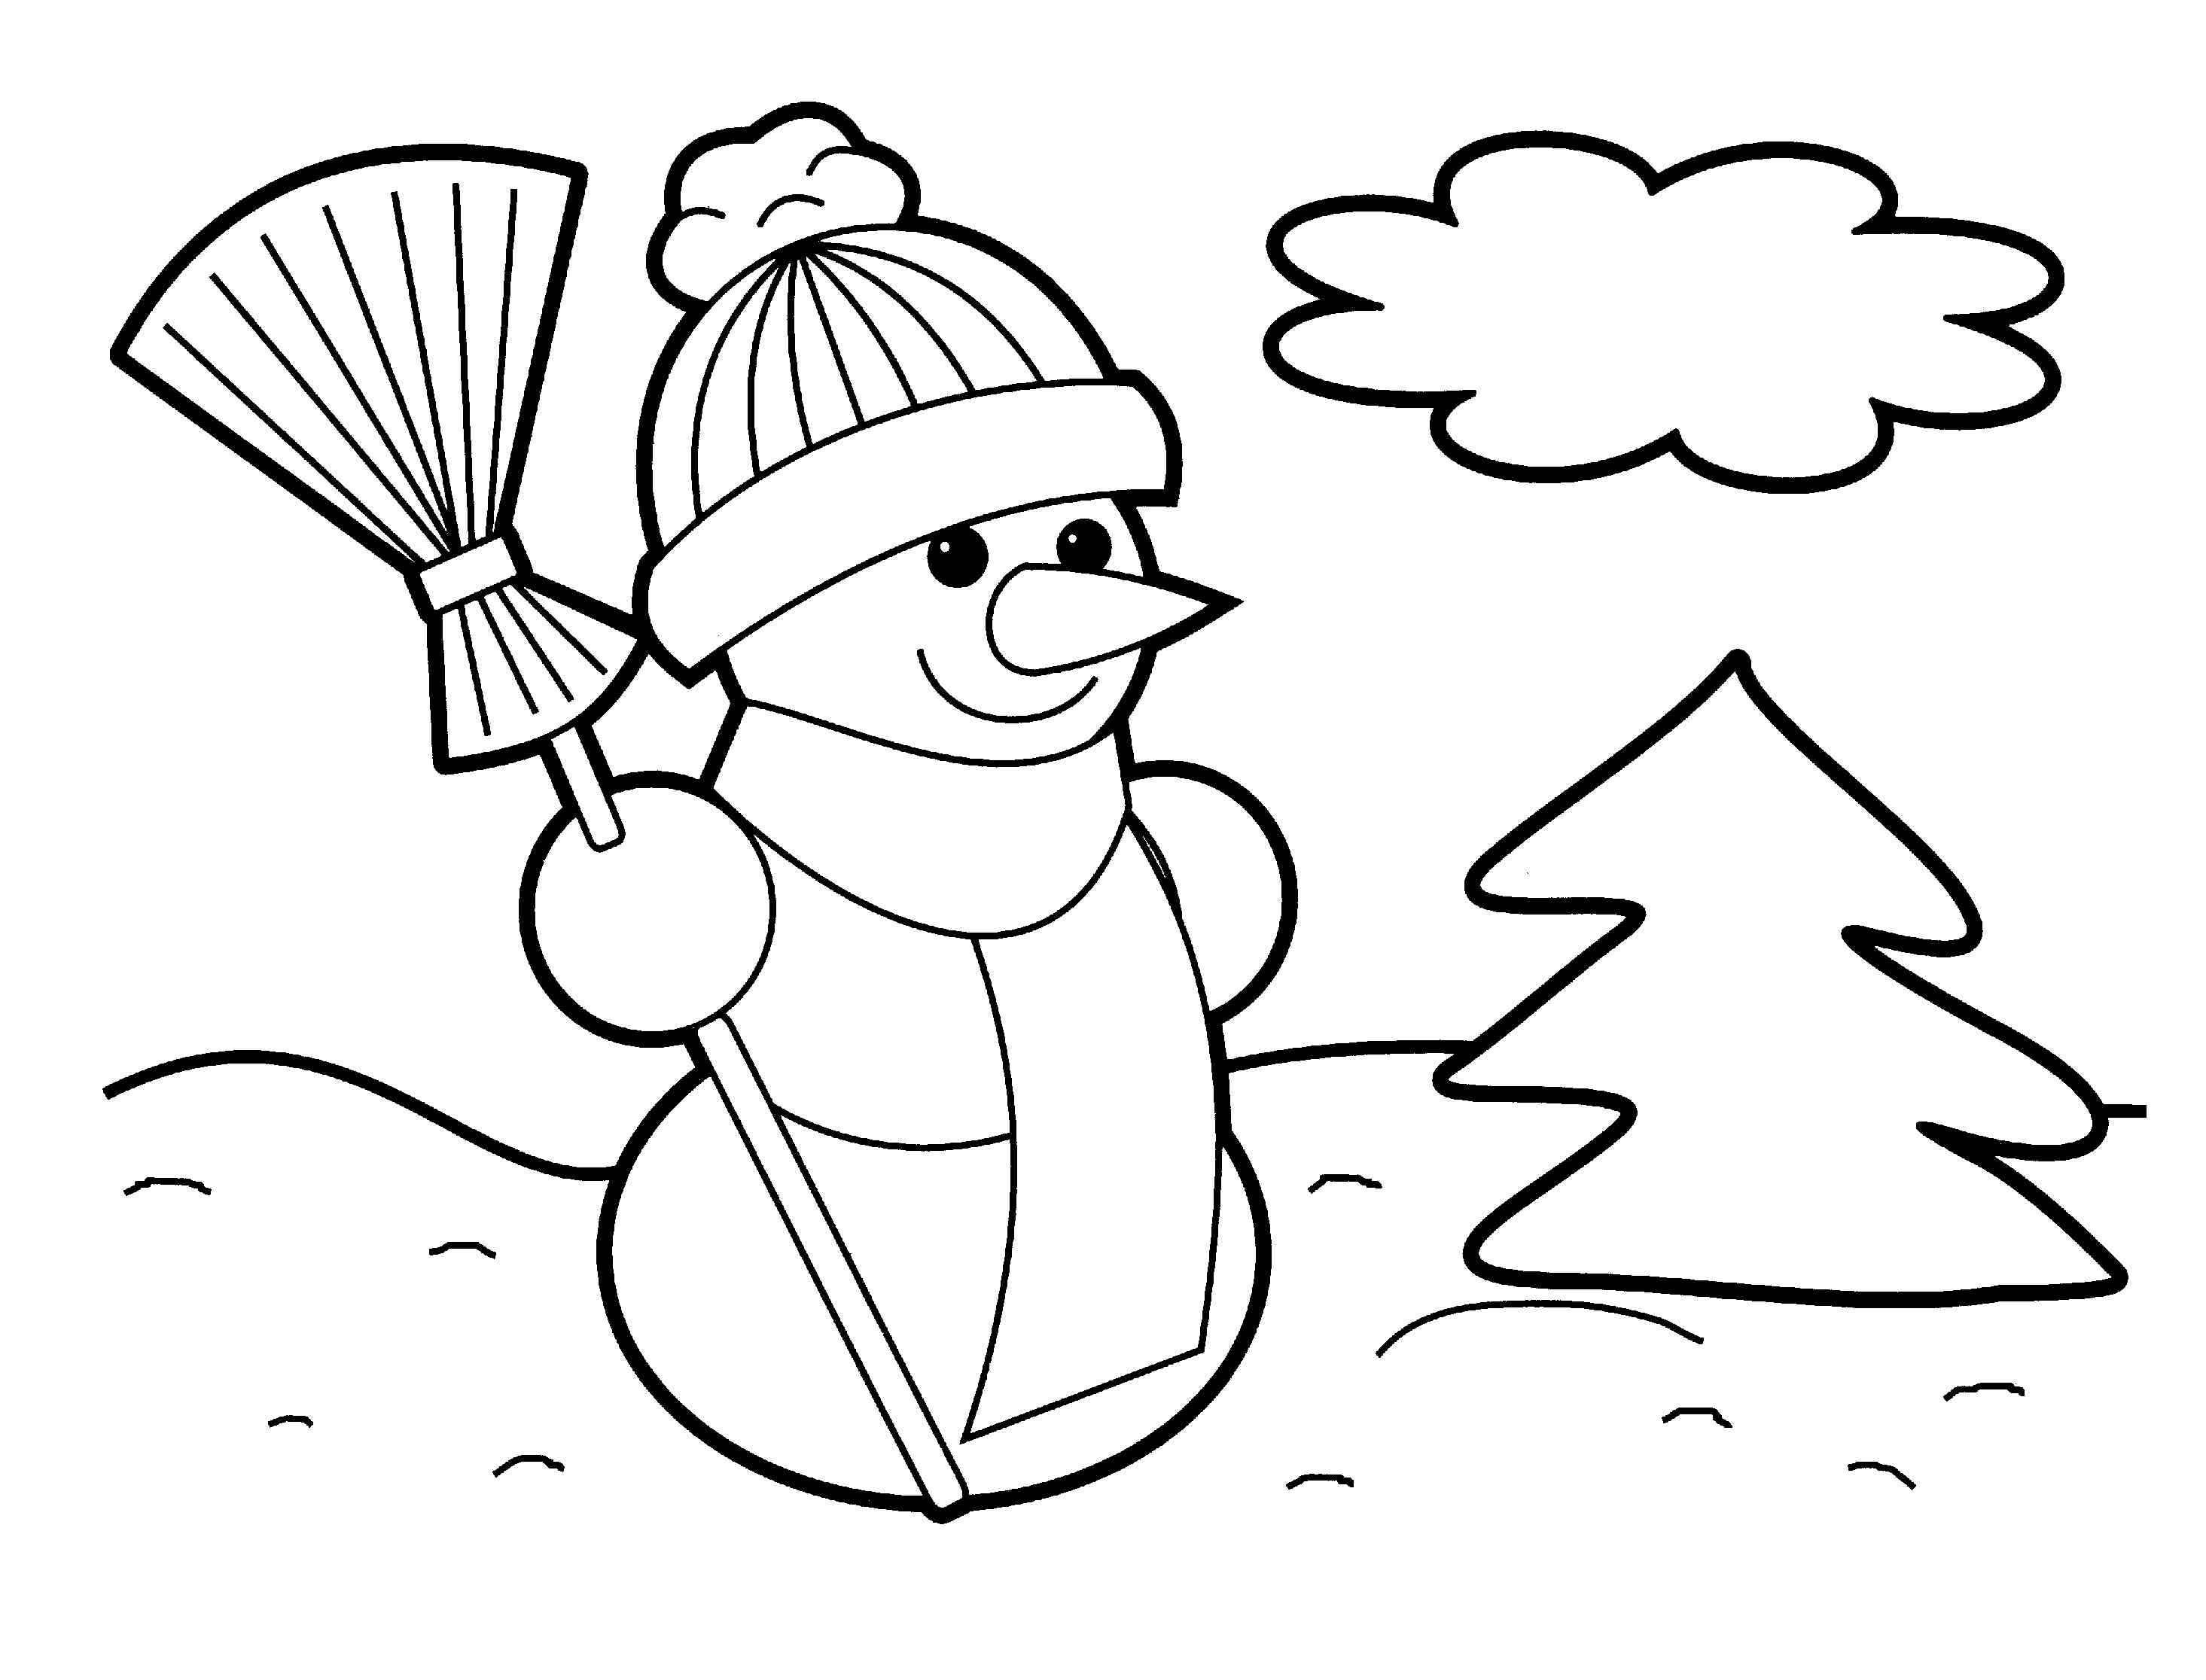 Lego Christmas Coloring Pages at GetColorings.com | Free printable